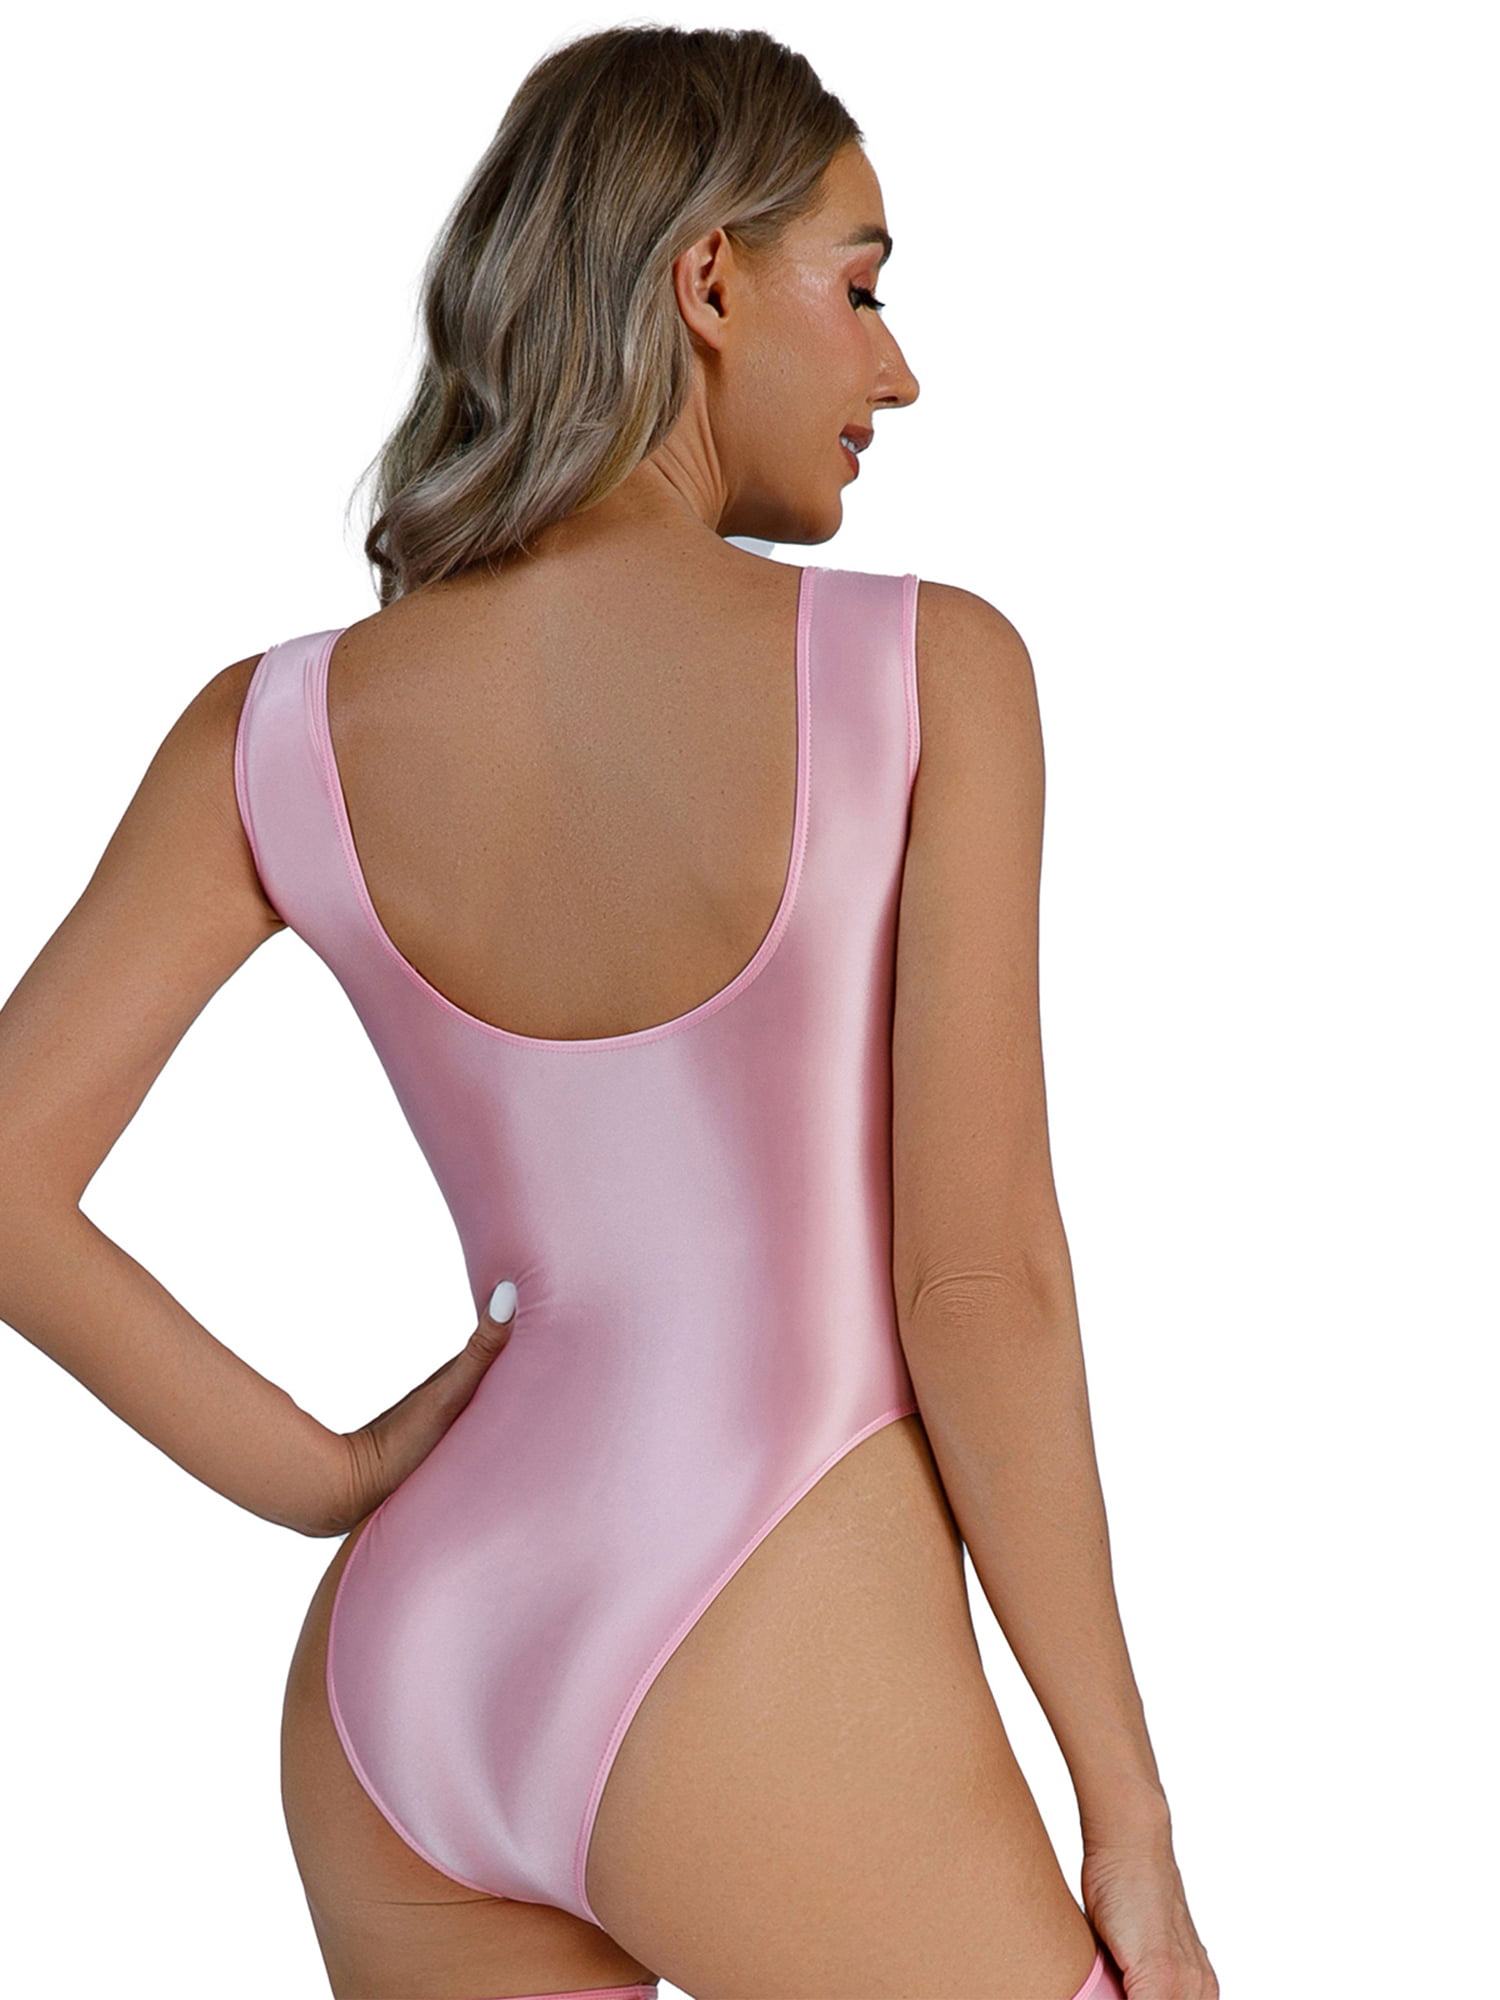 IEFIEL Womens Solid Smooth Glossy Bodysuit Swimsuit Shiny High Cut